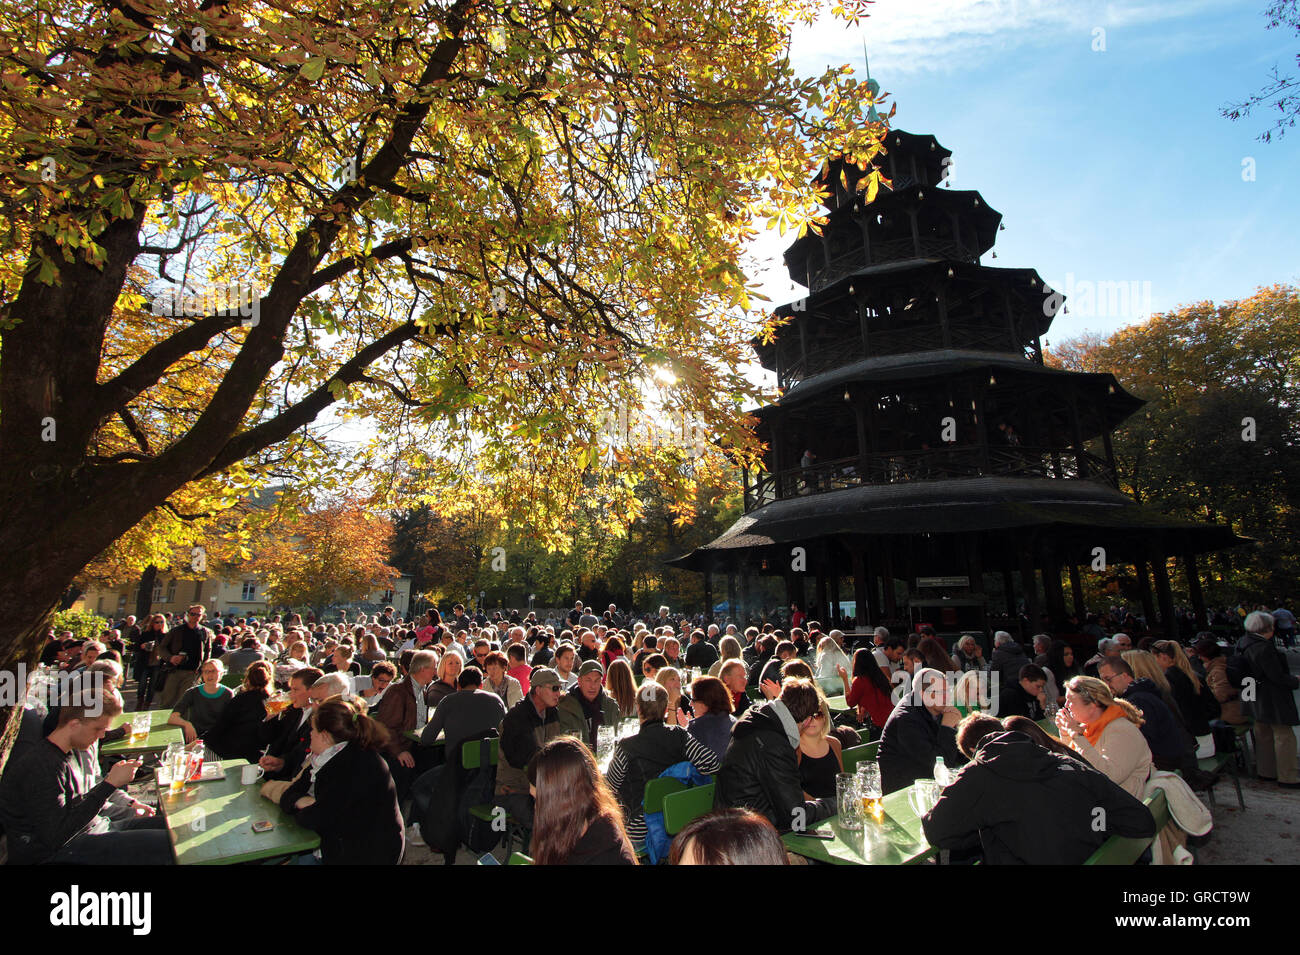 Warm And Sunny Fall Weather Led To Crowd At Beer Garden At Chinesischem Turm In Munich Stock Photo